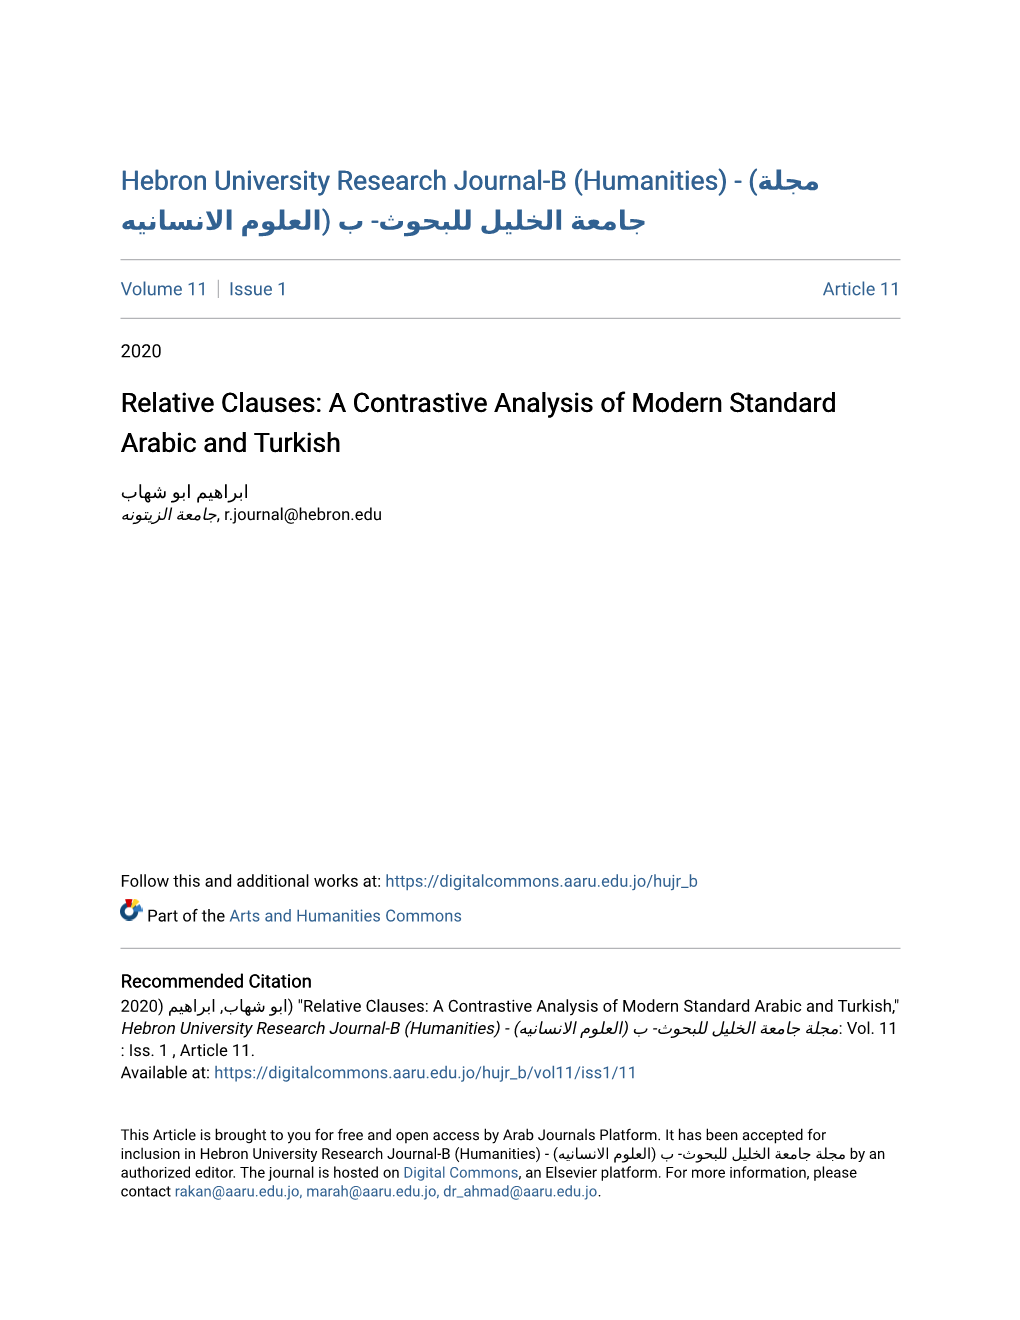 Relative Clauses: a Contrastive Analysis of Modern Standard Arabic and Turkish